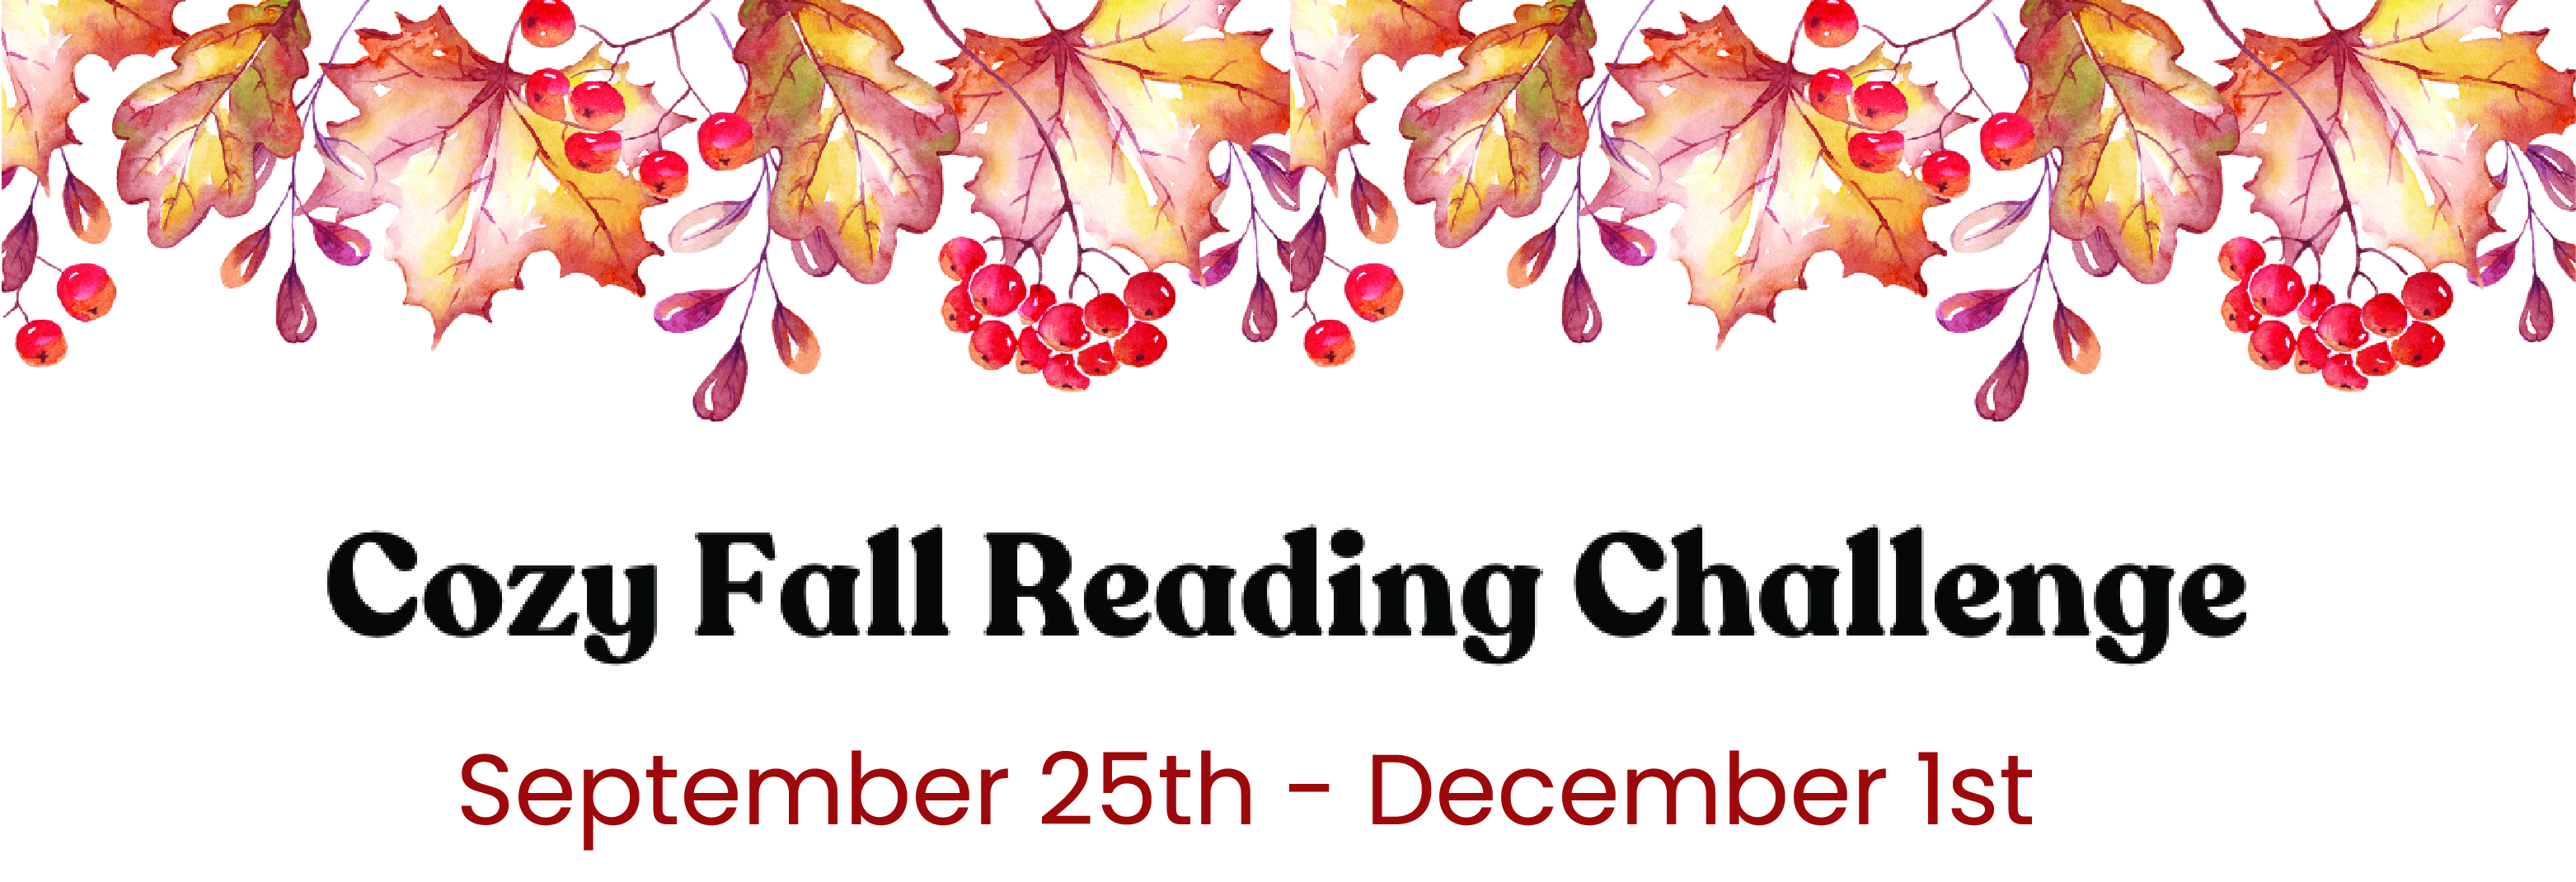 Cozy Fall Reading Challenge